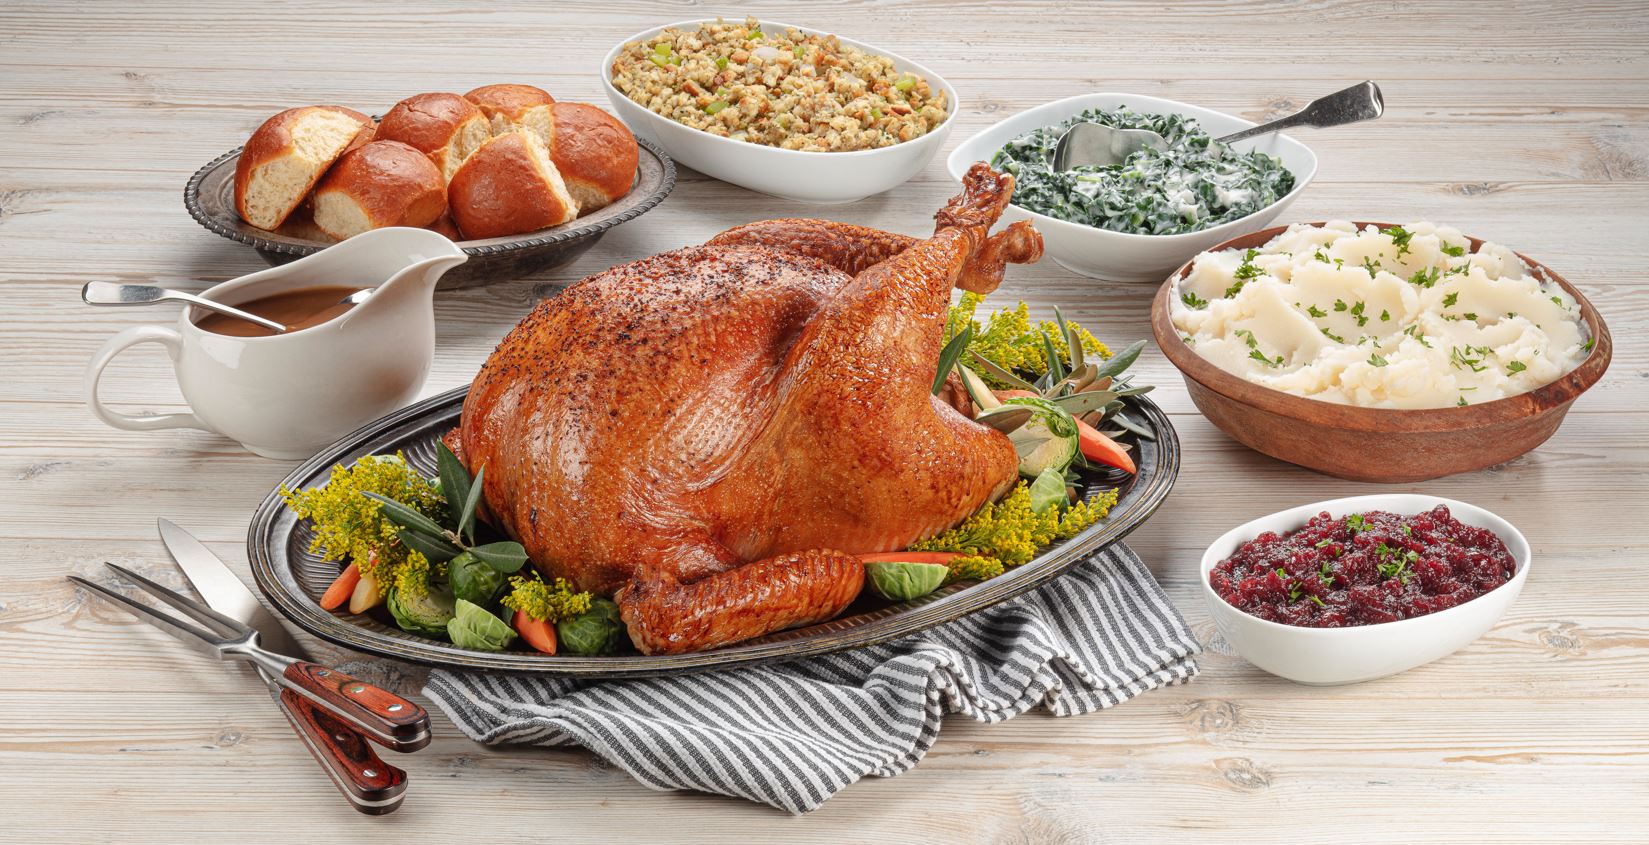 Thanksgiving meal with turkey and sides on a wooden table